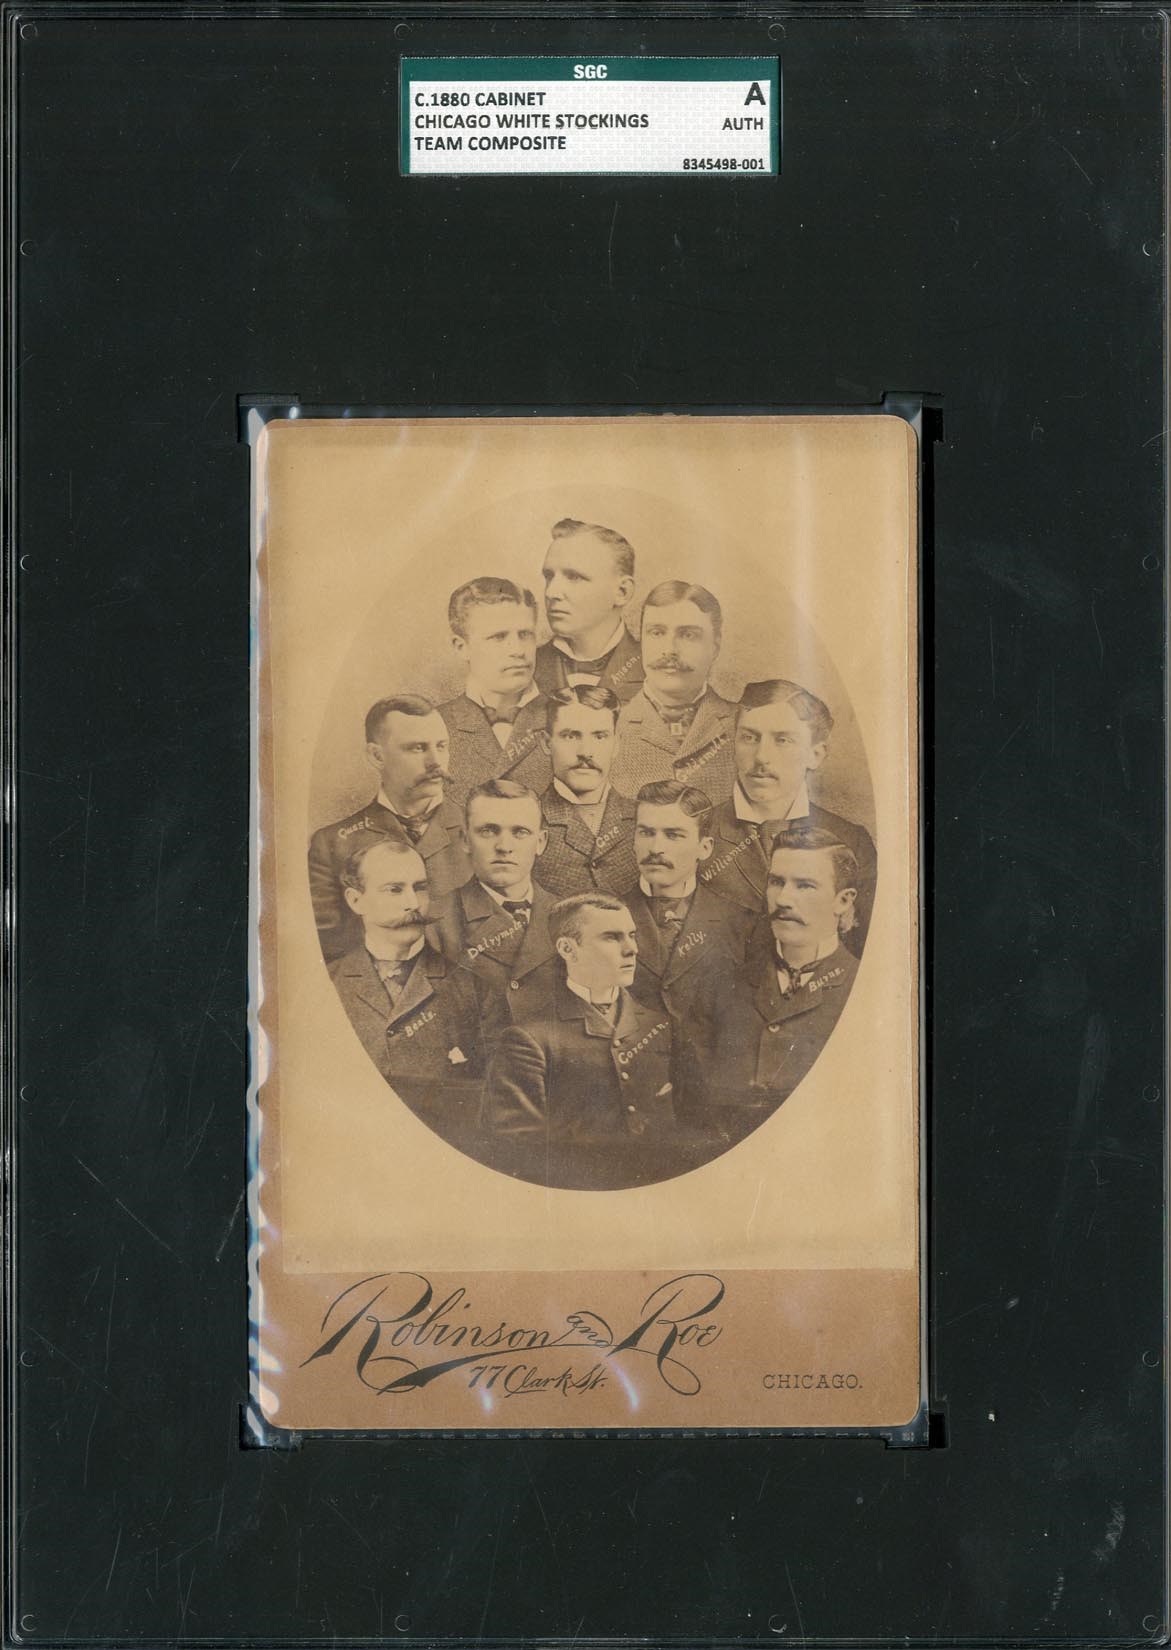 - 1880 Chicago White Stockings Cabinet Card (SGC)